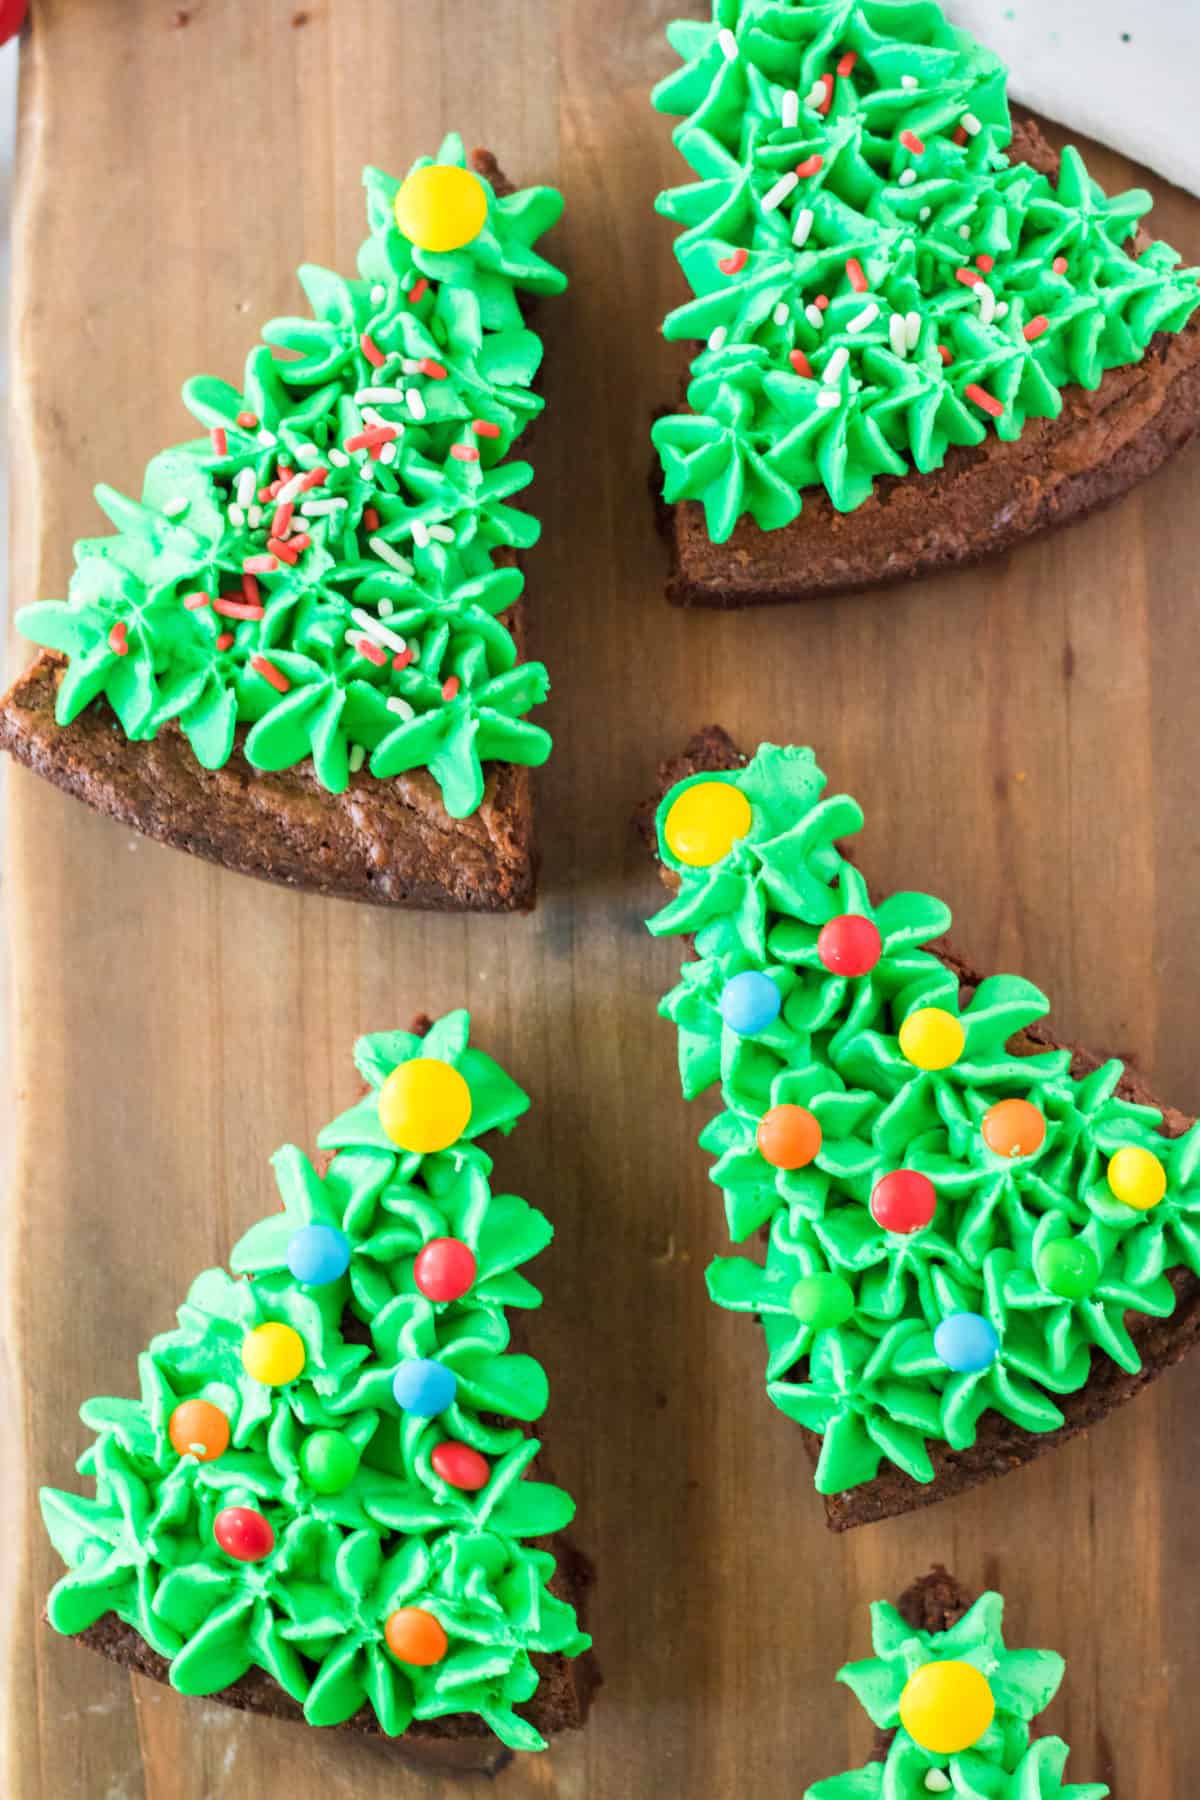 brownies cut into triangles and frosted with green frosting and sprinkles to look like Christmas trees on wooden background